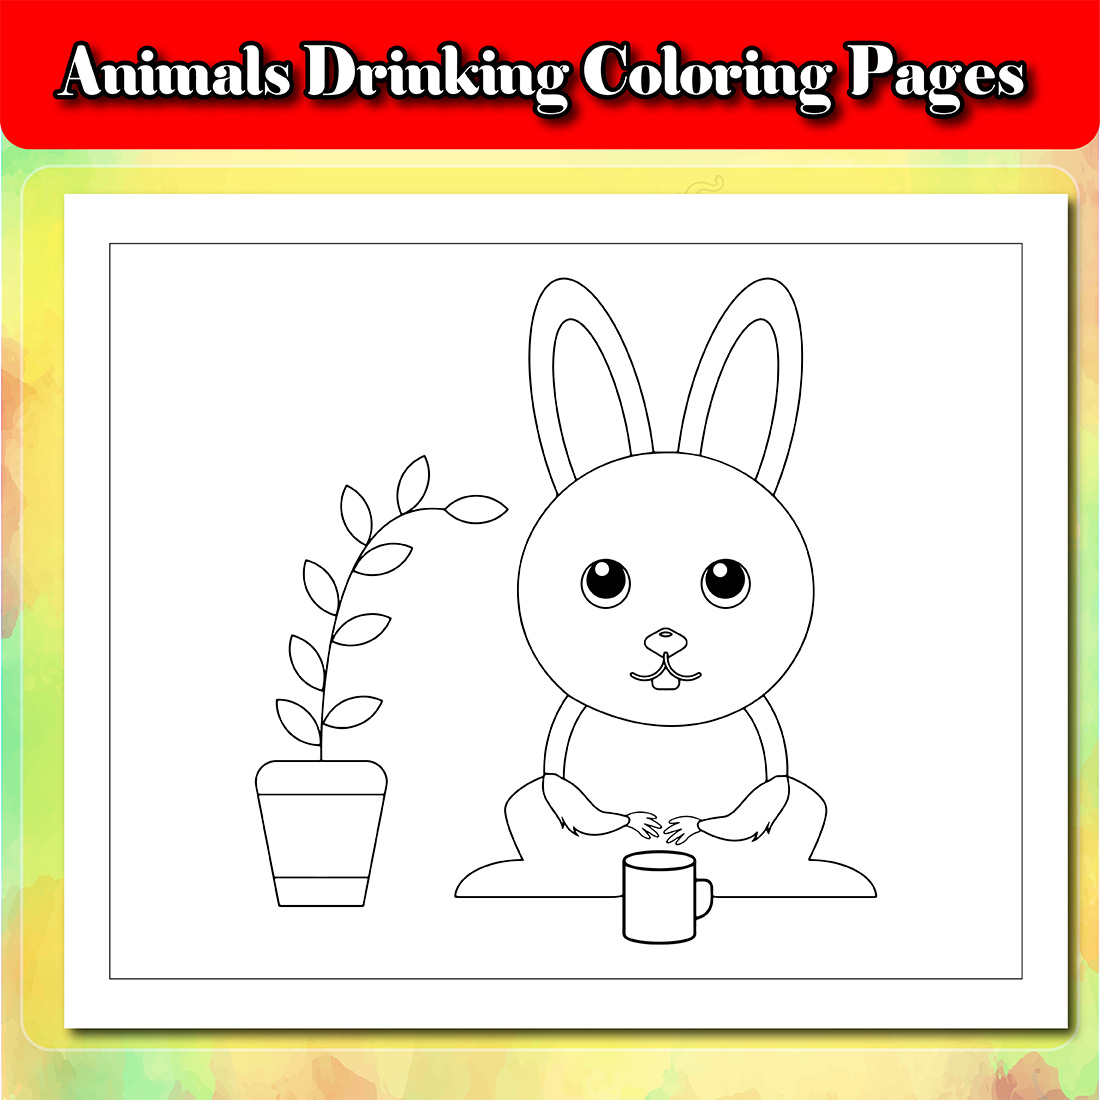 Animals Drinking Coloring Pages example.